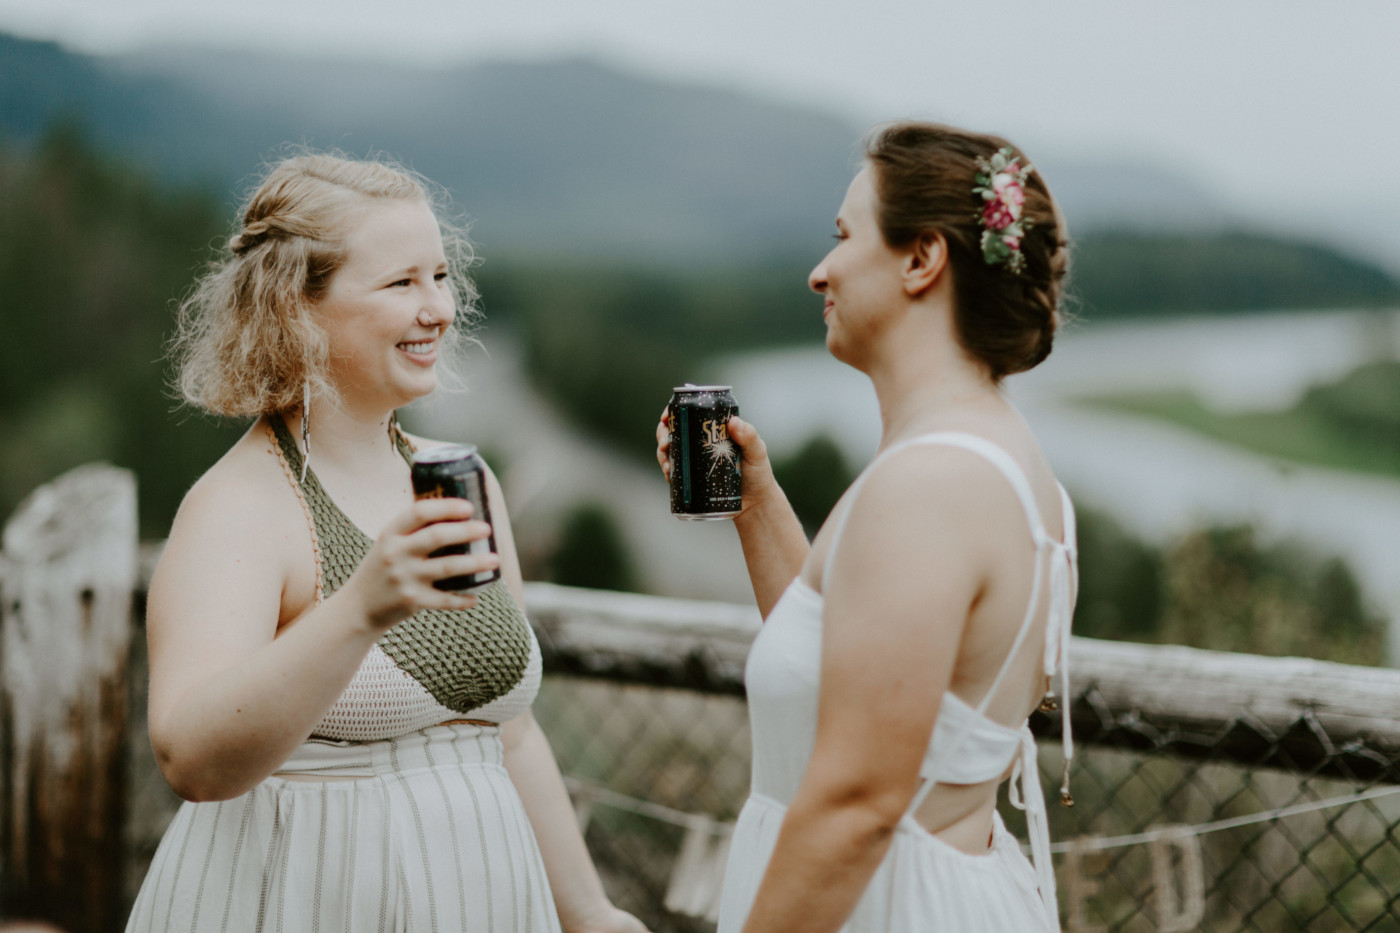 Kate and Audrey toast after their elopement. Elopement wedding photography at Bridal Veil Falls by Sienna Plus Josh.